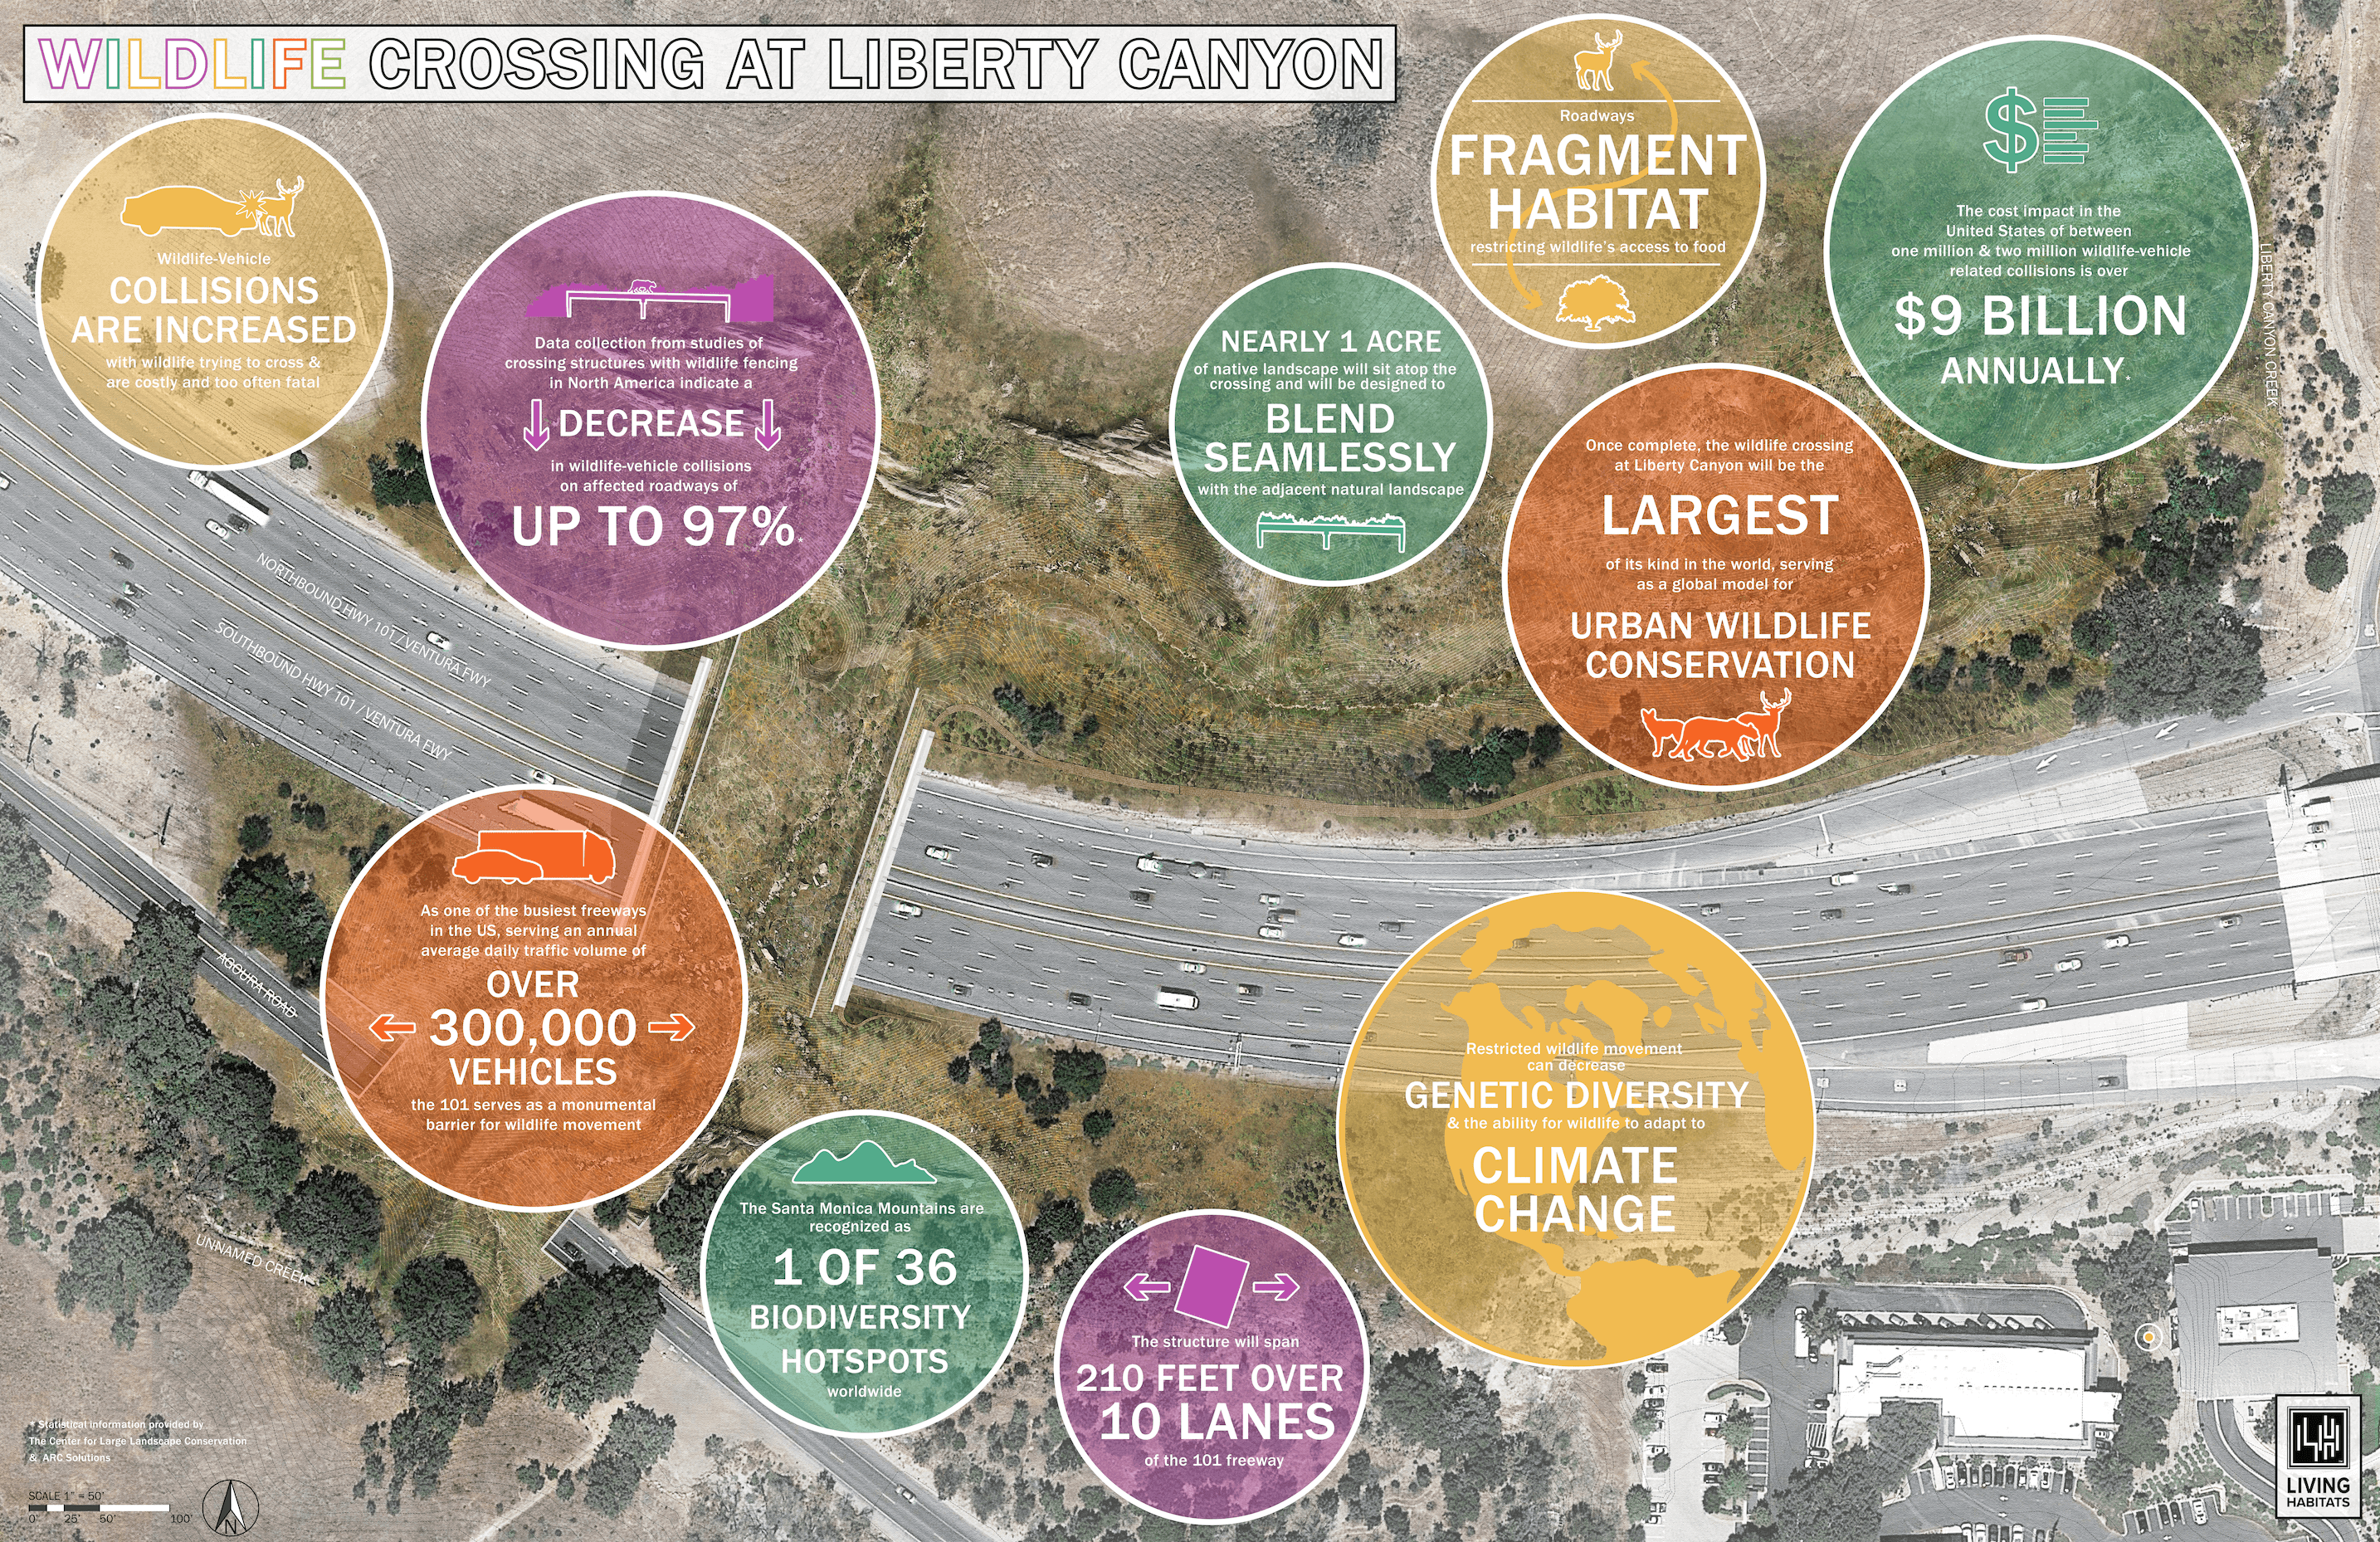 An infographic indicating which species will benefit from the Liberty Canyon Wildlife Crossing